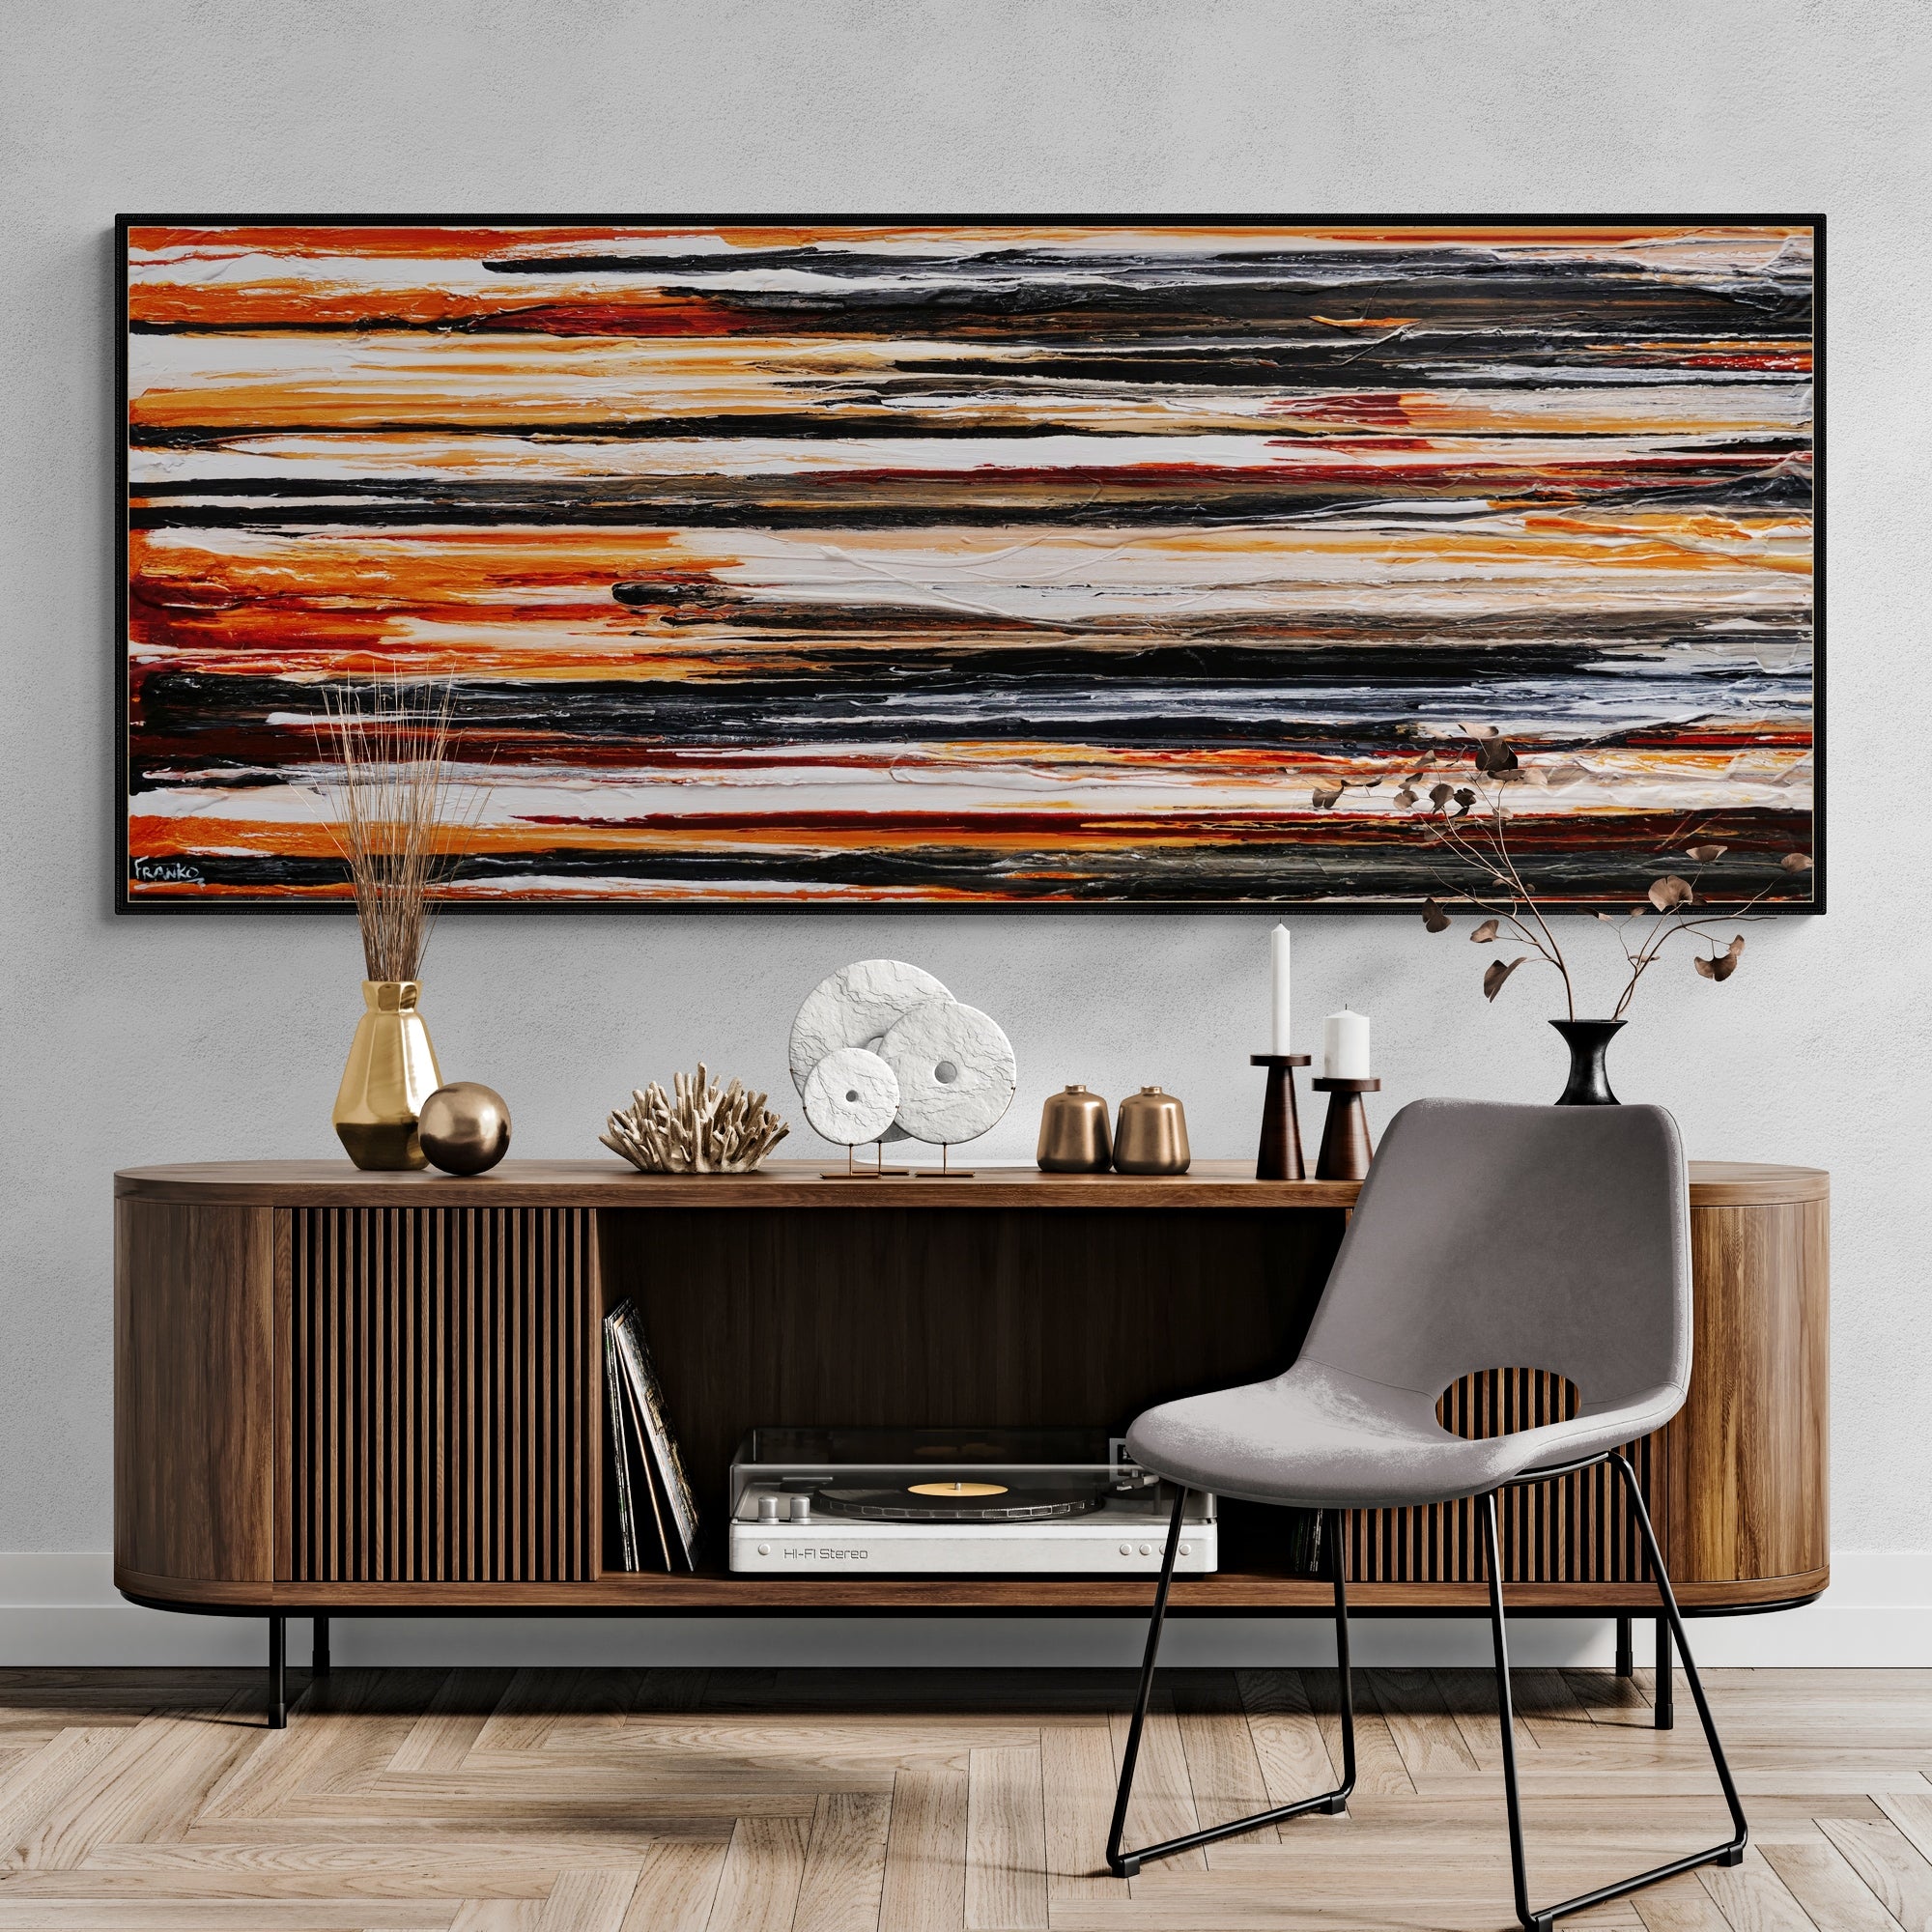 Rusted Landscape 200cm x 80cm Black White Brown Textured Abstract Painting (SOLD)